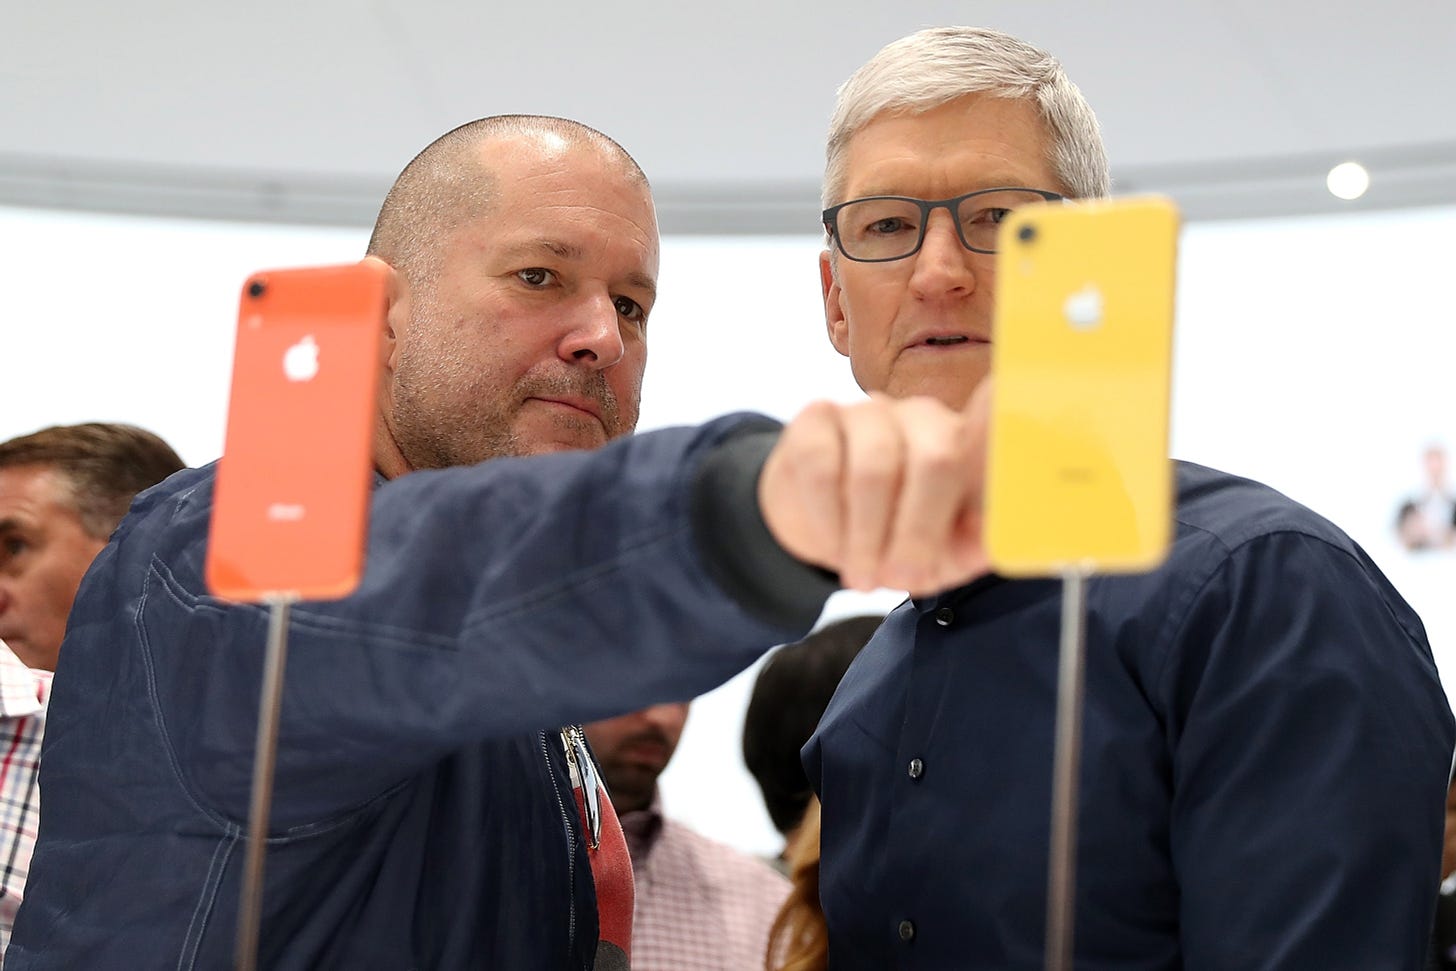 Jony Ive, ex-Apple design chief, clashed with VR headset team